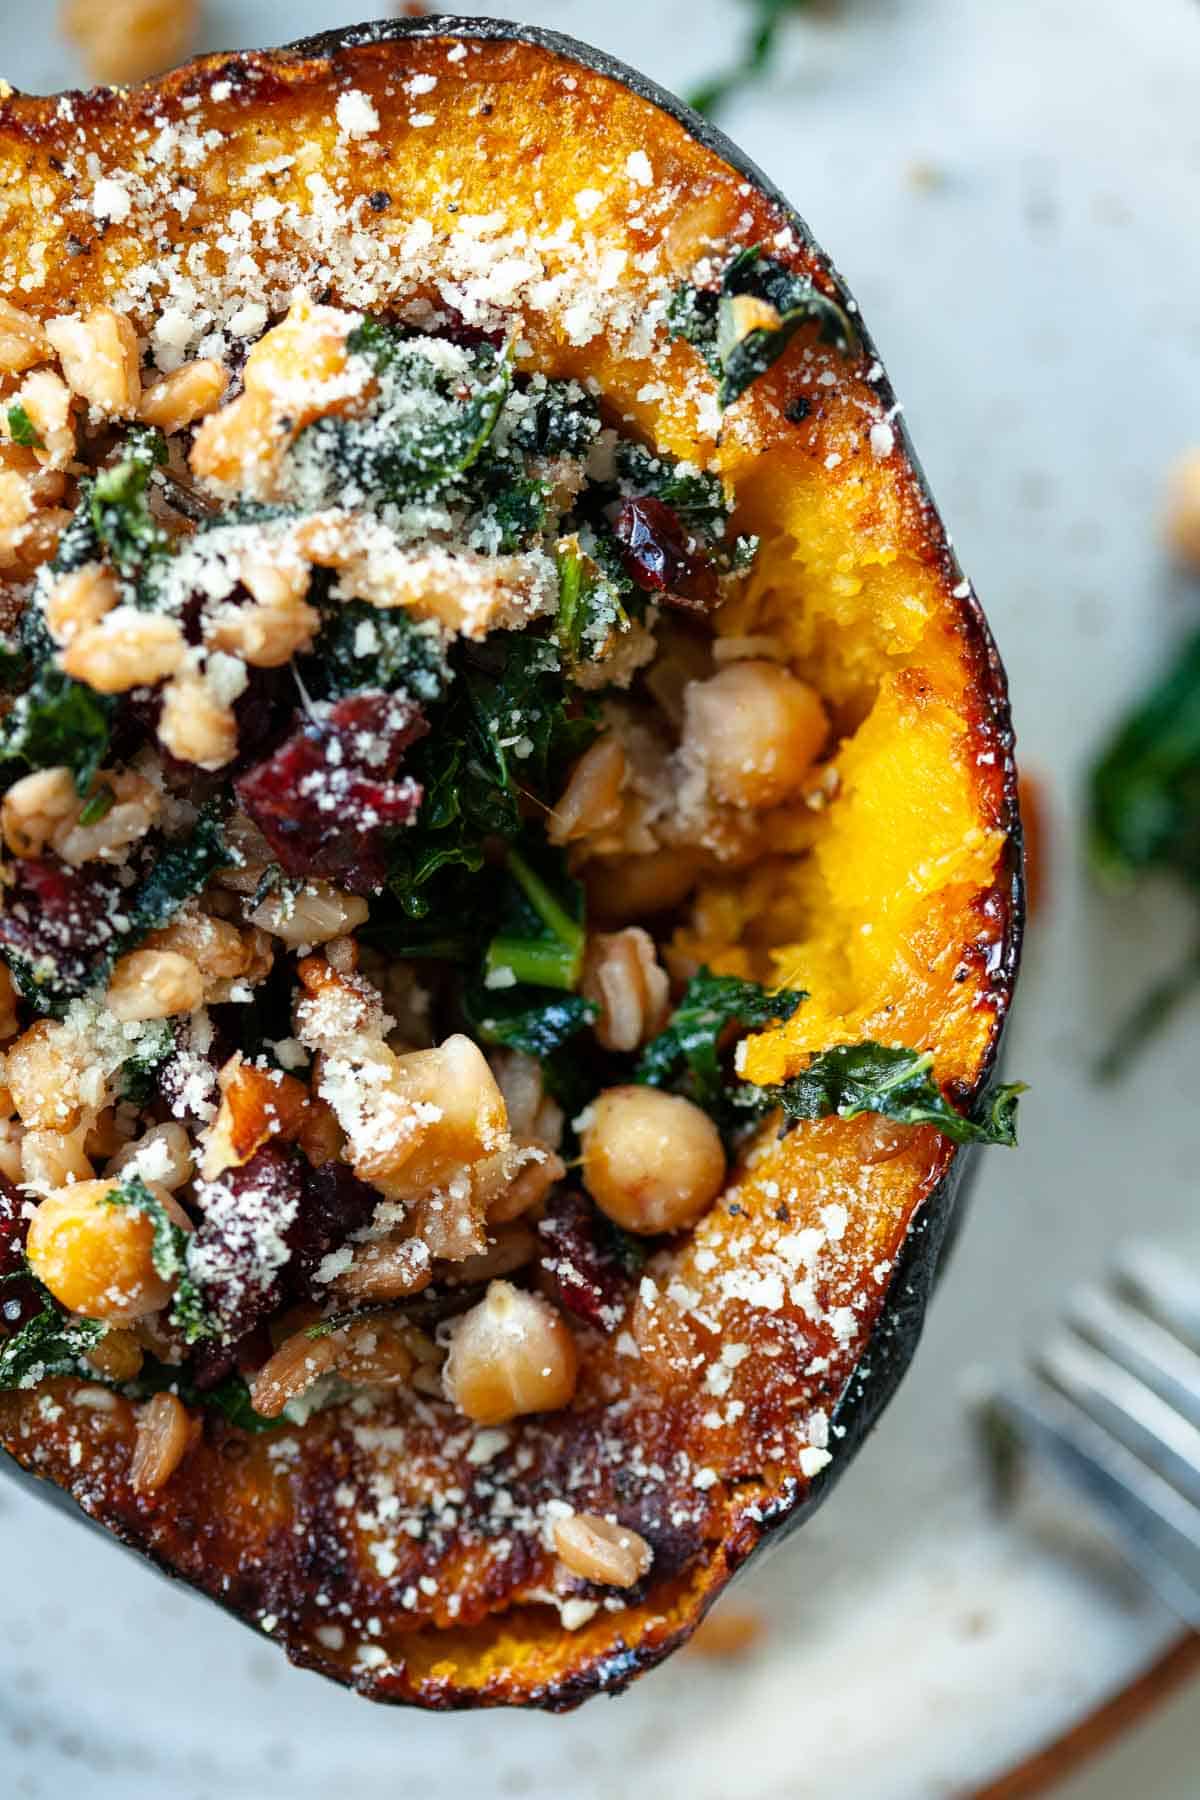 acorn squash stuffed with kale, chickpeas, farro, cranberries, pecans and parmesan cheese on grey plate